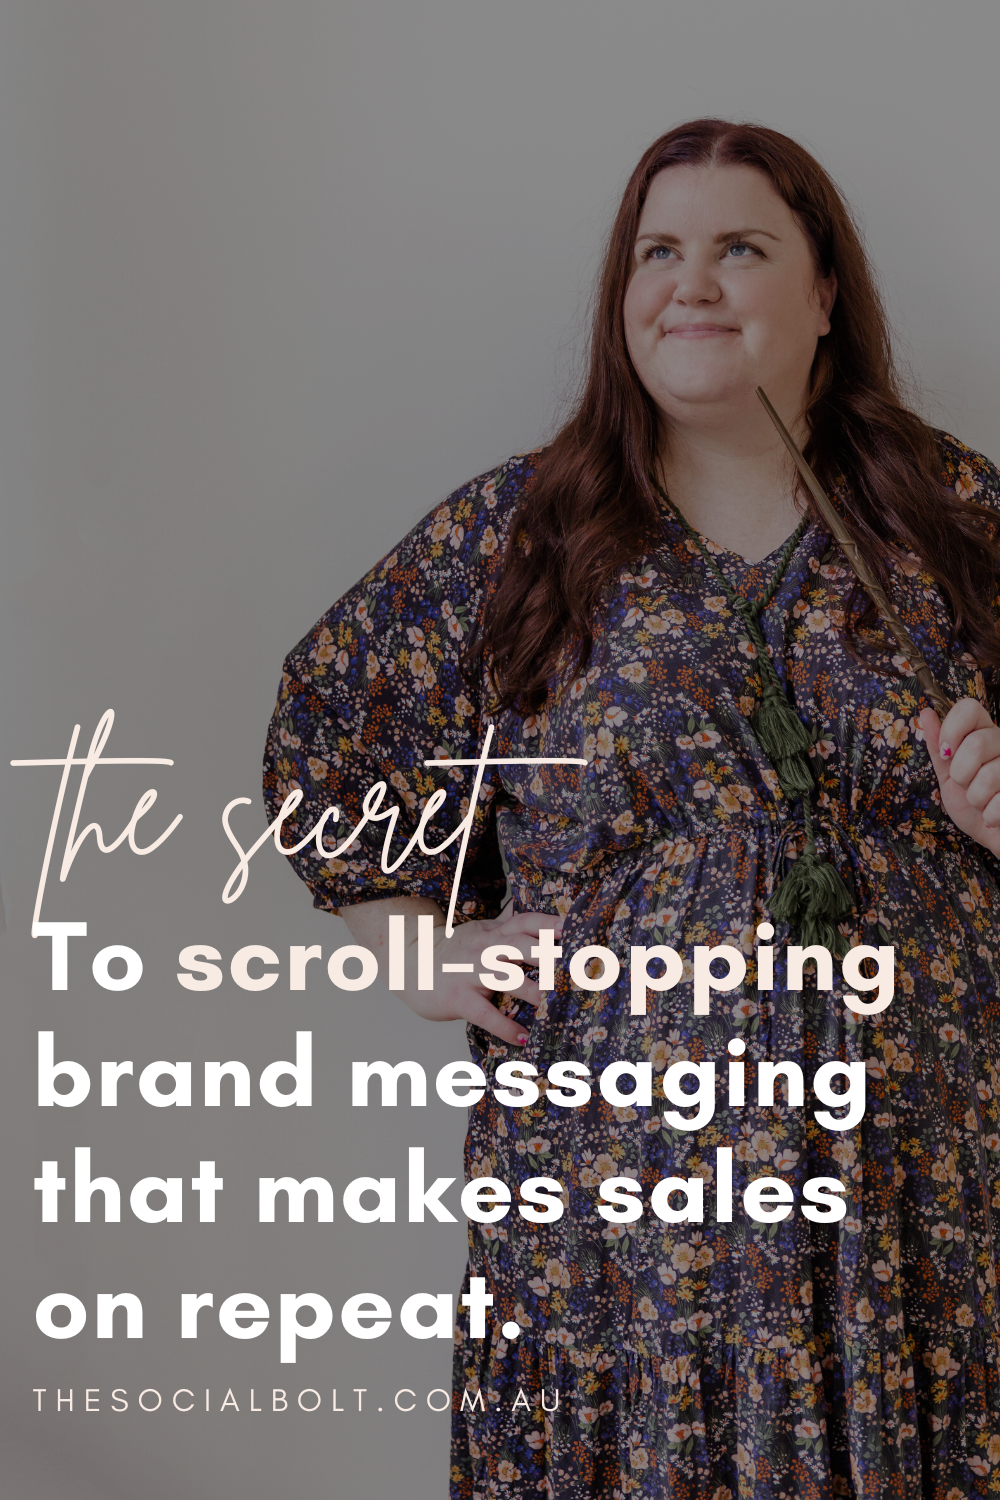 The Secret To Scroll-Stopping Brand Messaging That Makes Sales On Repeat